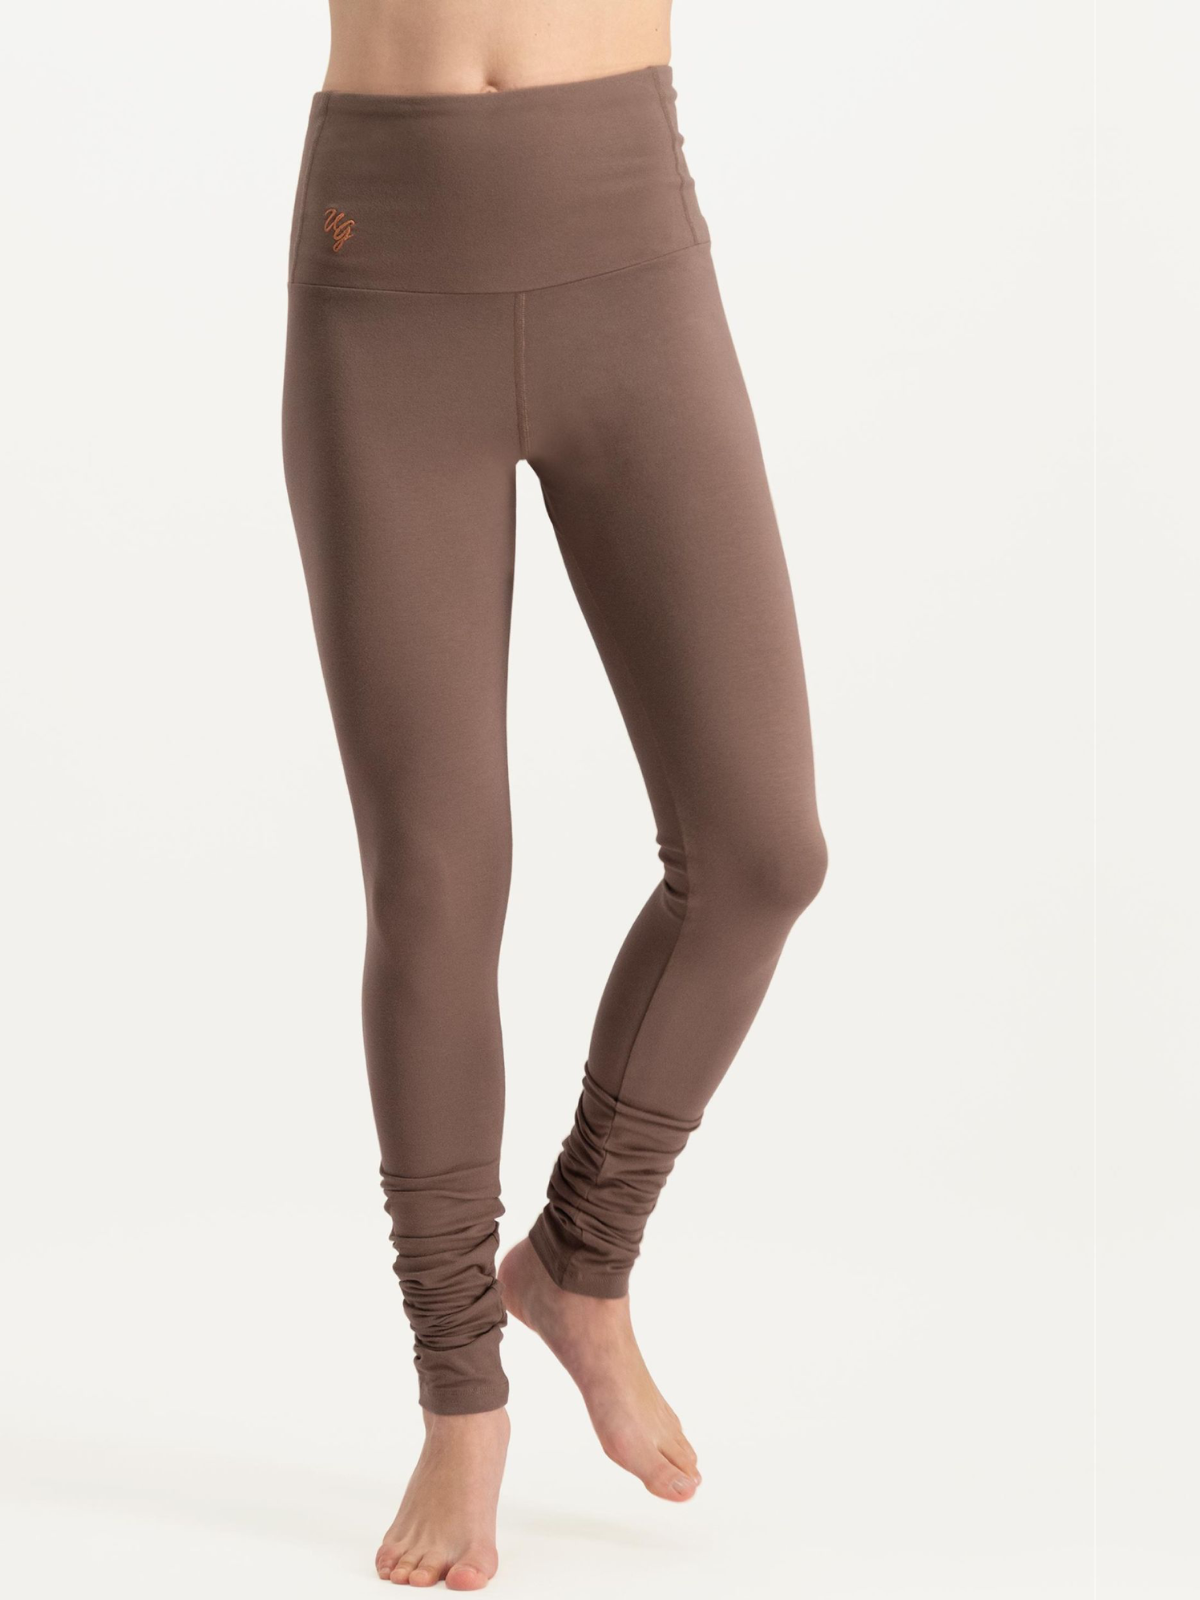 Gaiam Organic Ruched Legging Review - Gift Idea For Her